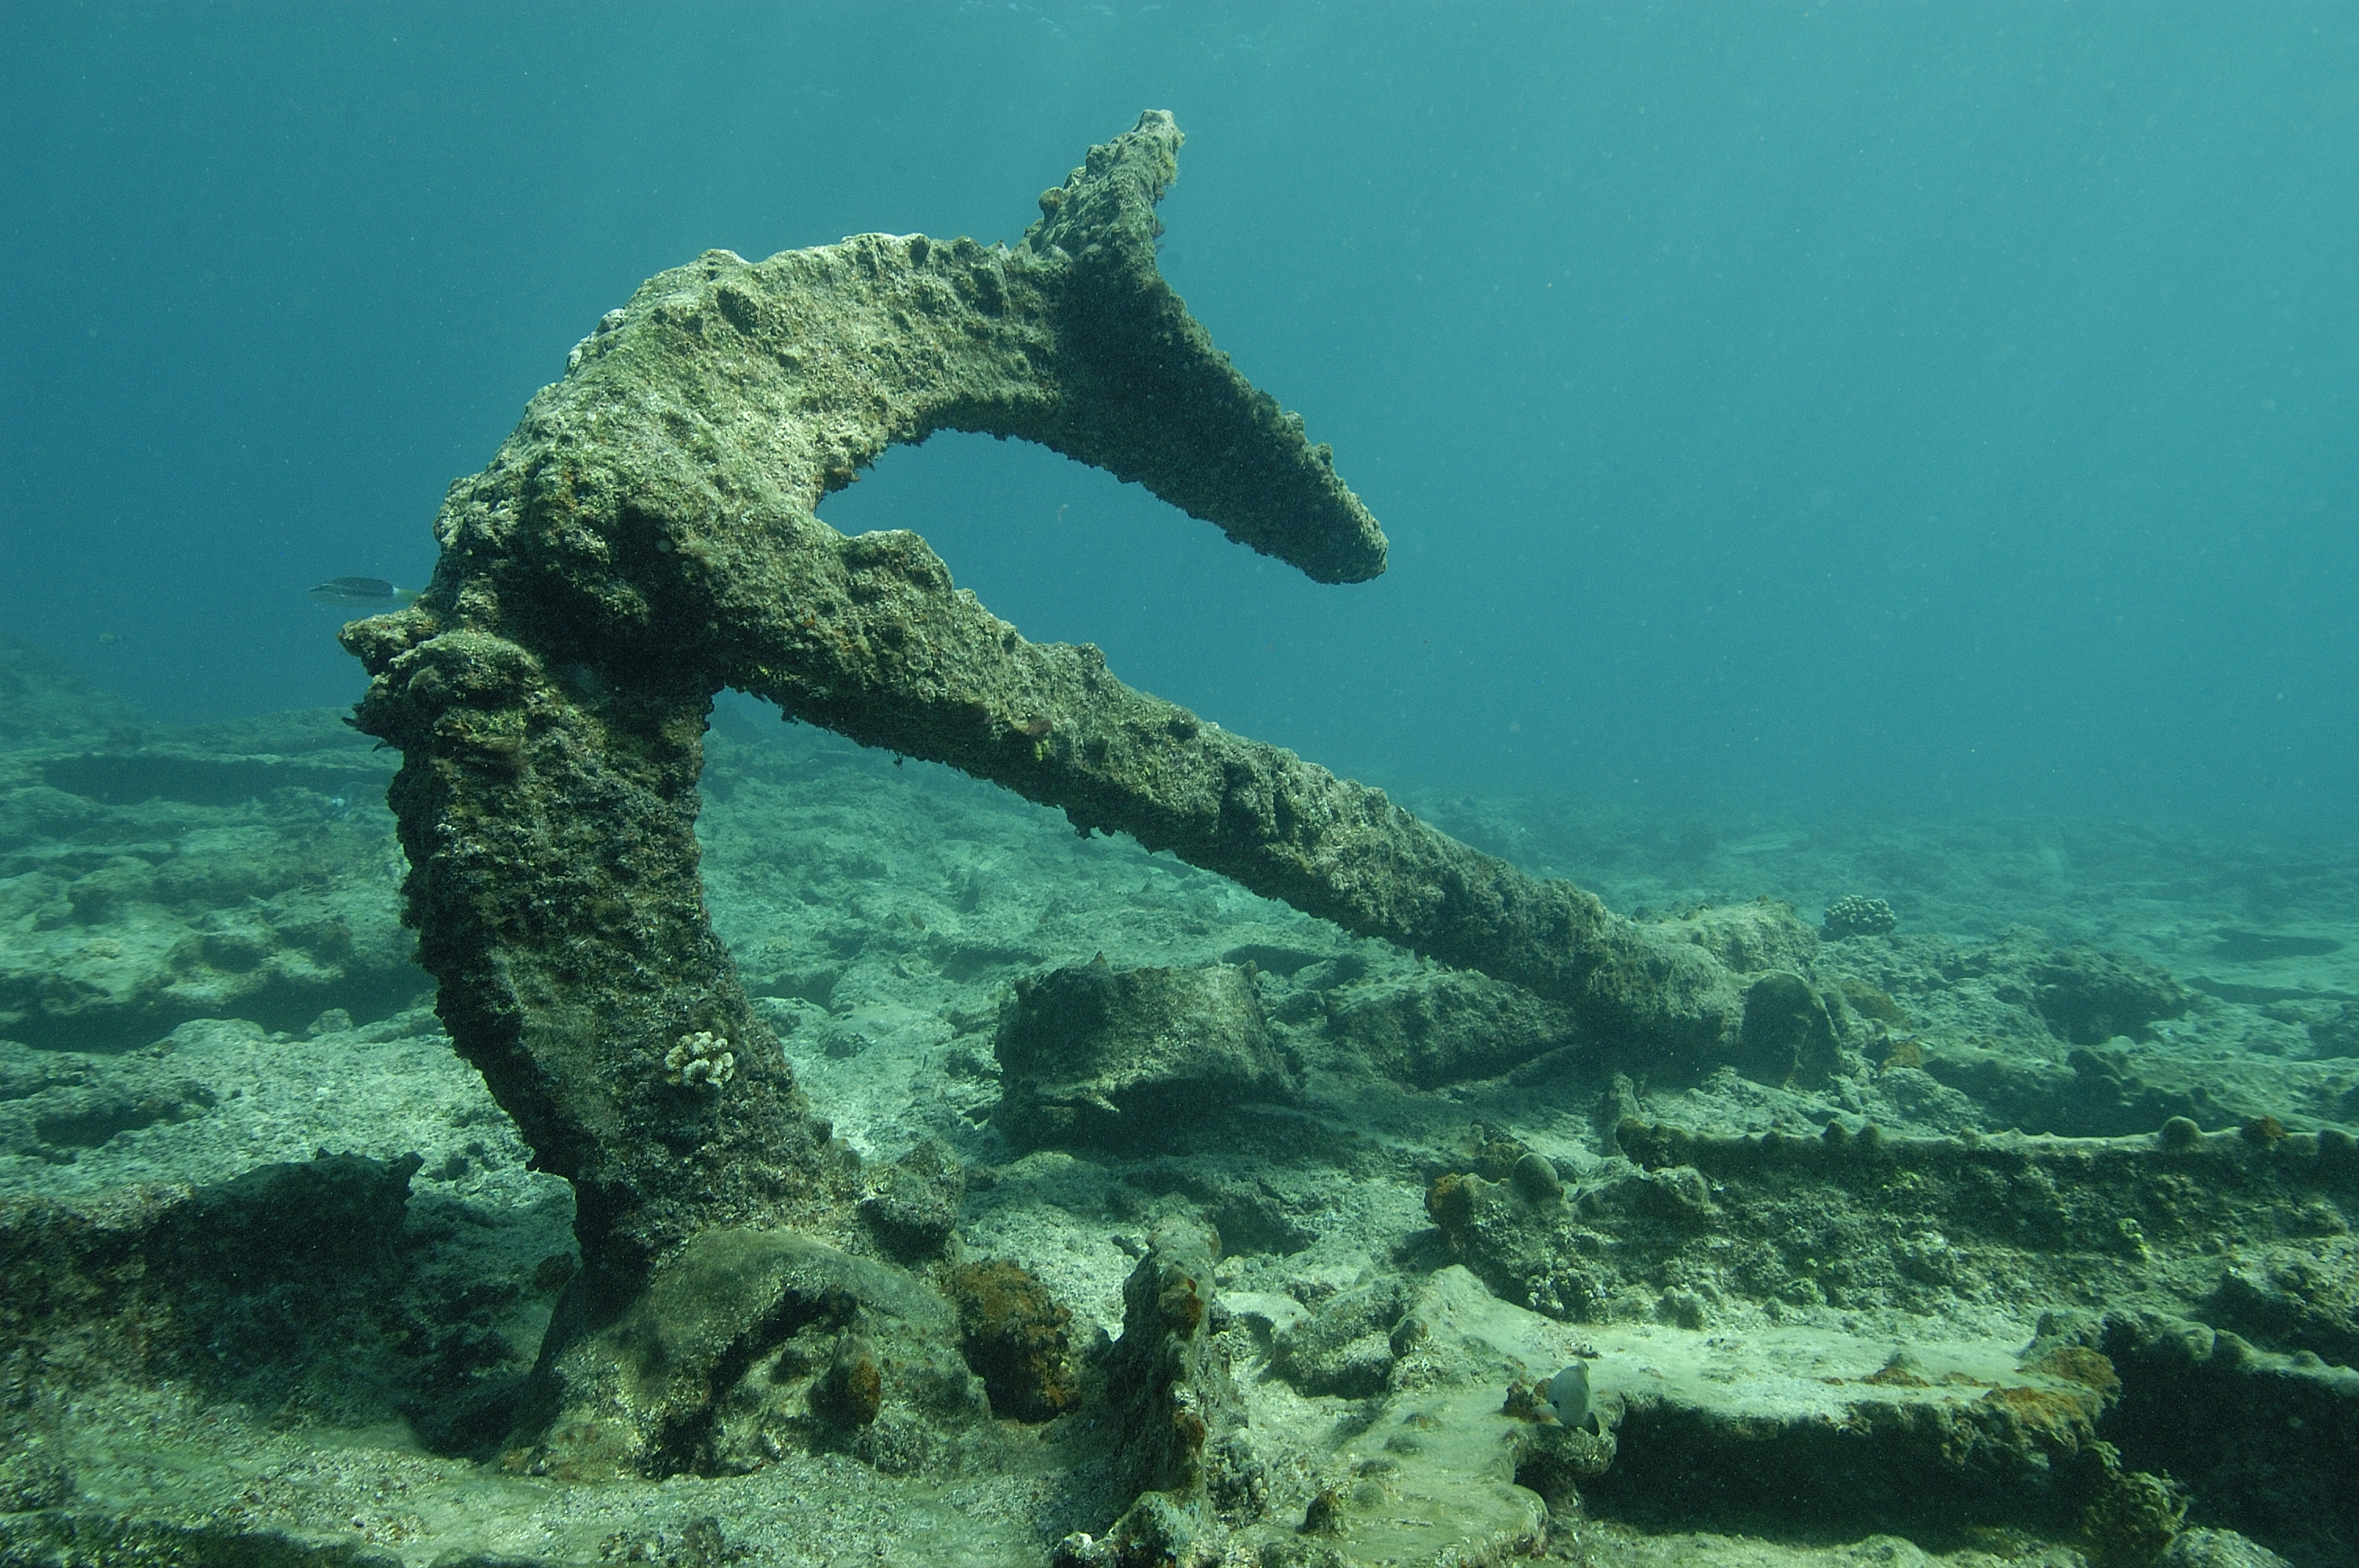 This is an image of the British sailing vessel Dunnottar Castle Trotman anchor, which is submerged near the Kure Atoll, part of Northwestern Hawaiian Islands.